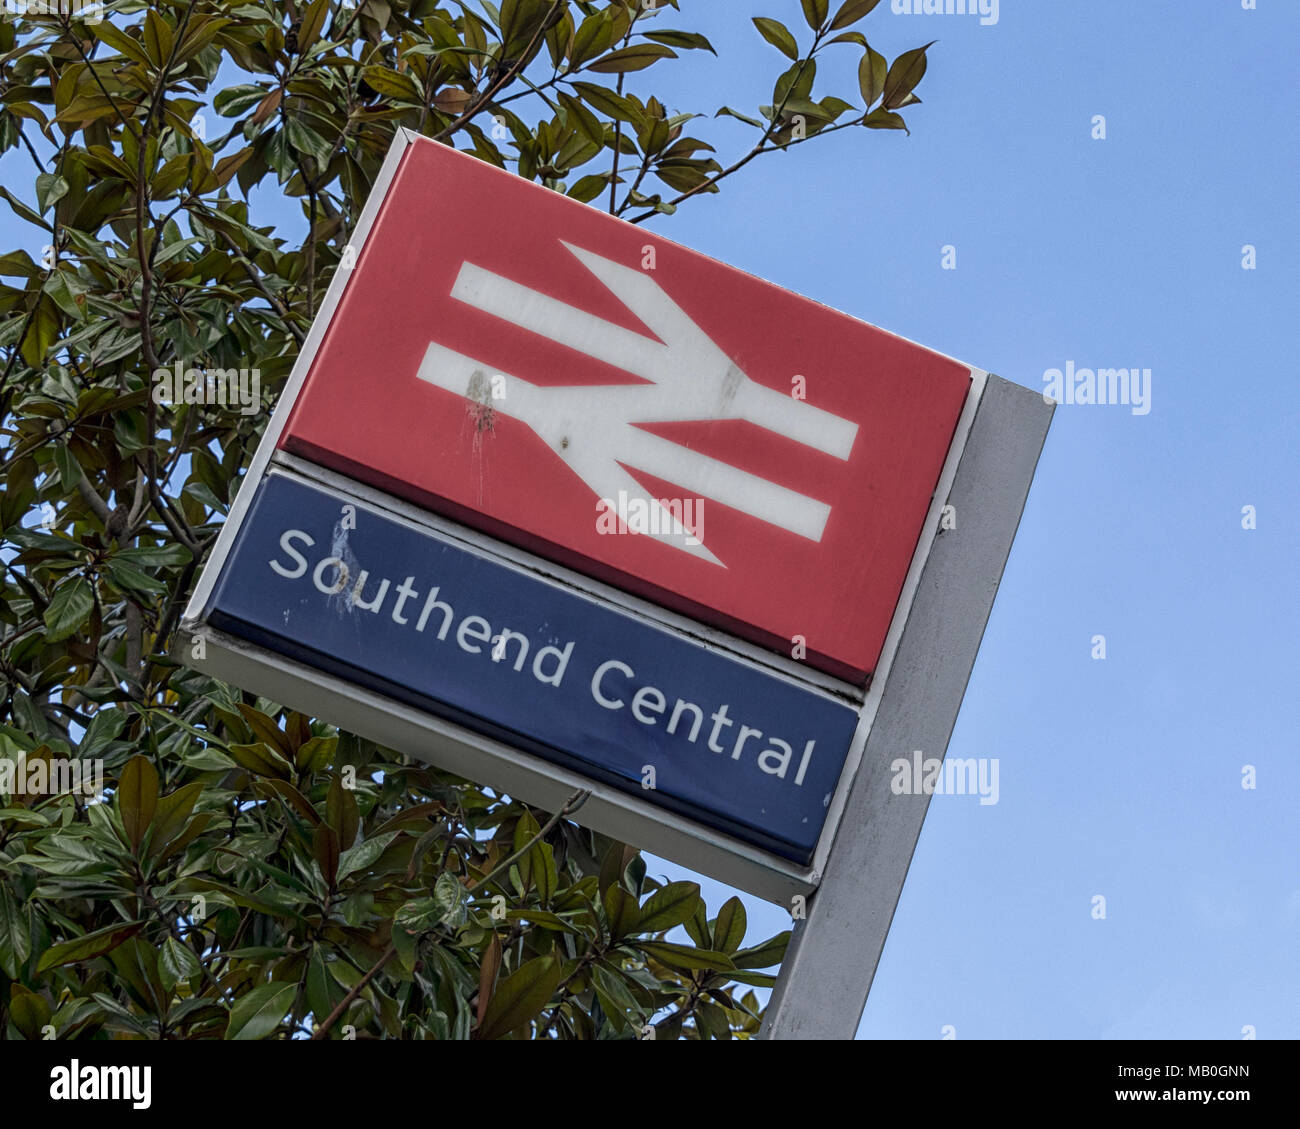 SOUTHEND-ON-SEA, ESSEX, UK - MARCH 29, 2018: Sign outside Southend Central Station on the C2C line Stock Photo